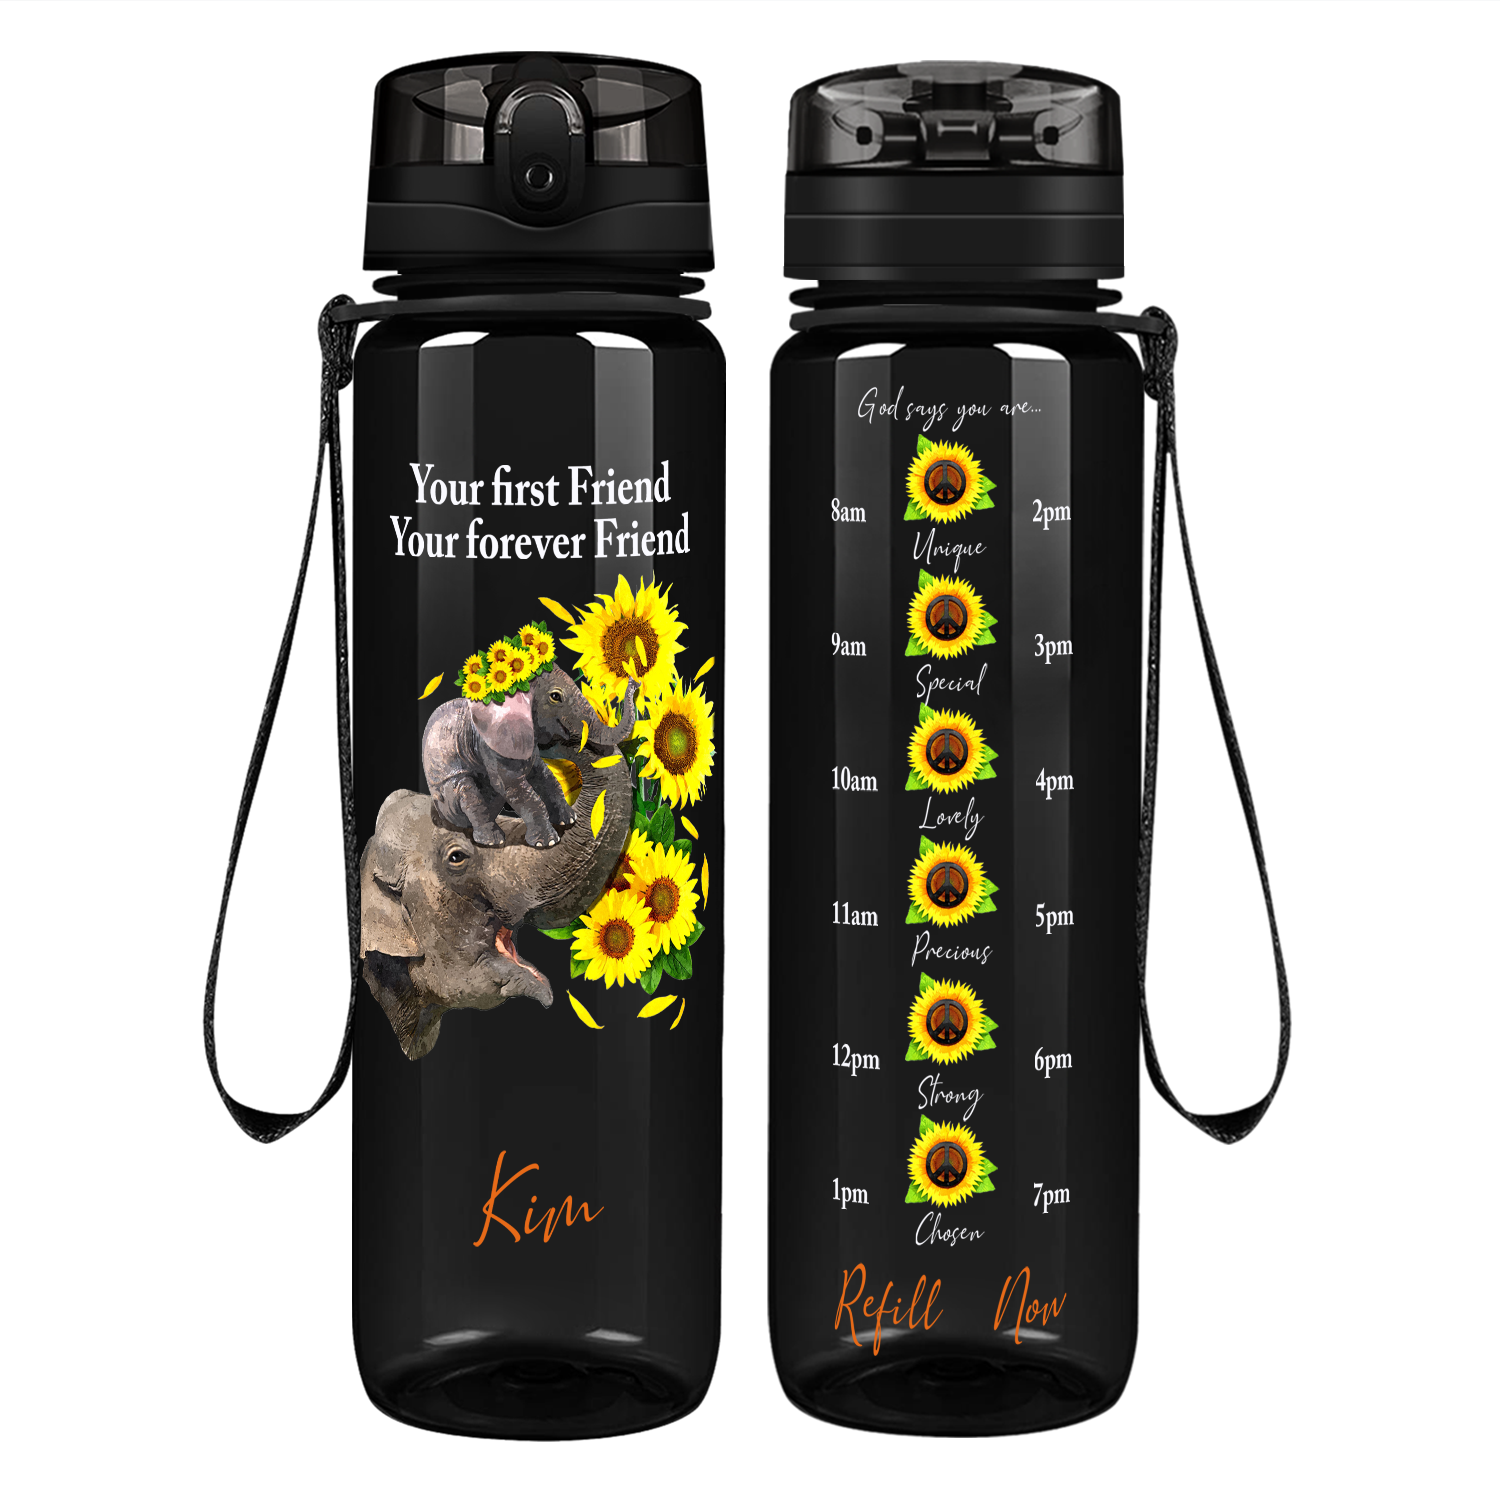 Personalized Your Forever Friend on 32 oz Motivational Tracking Water Bottle